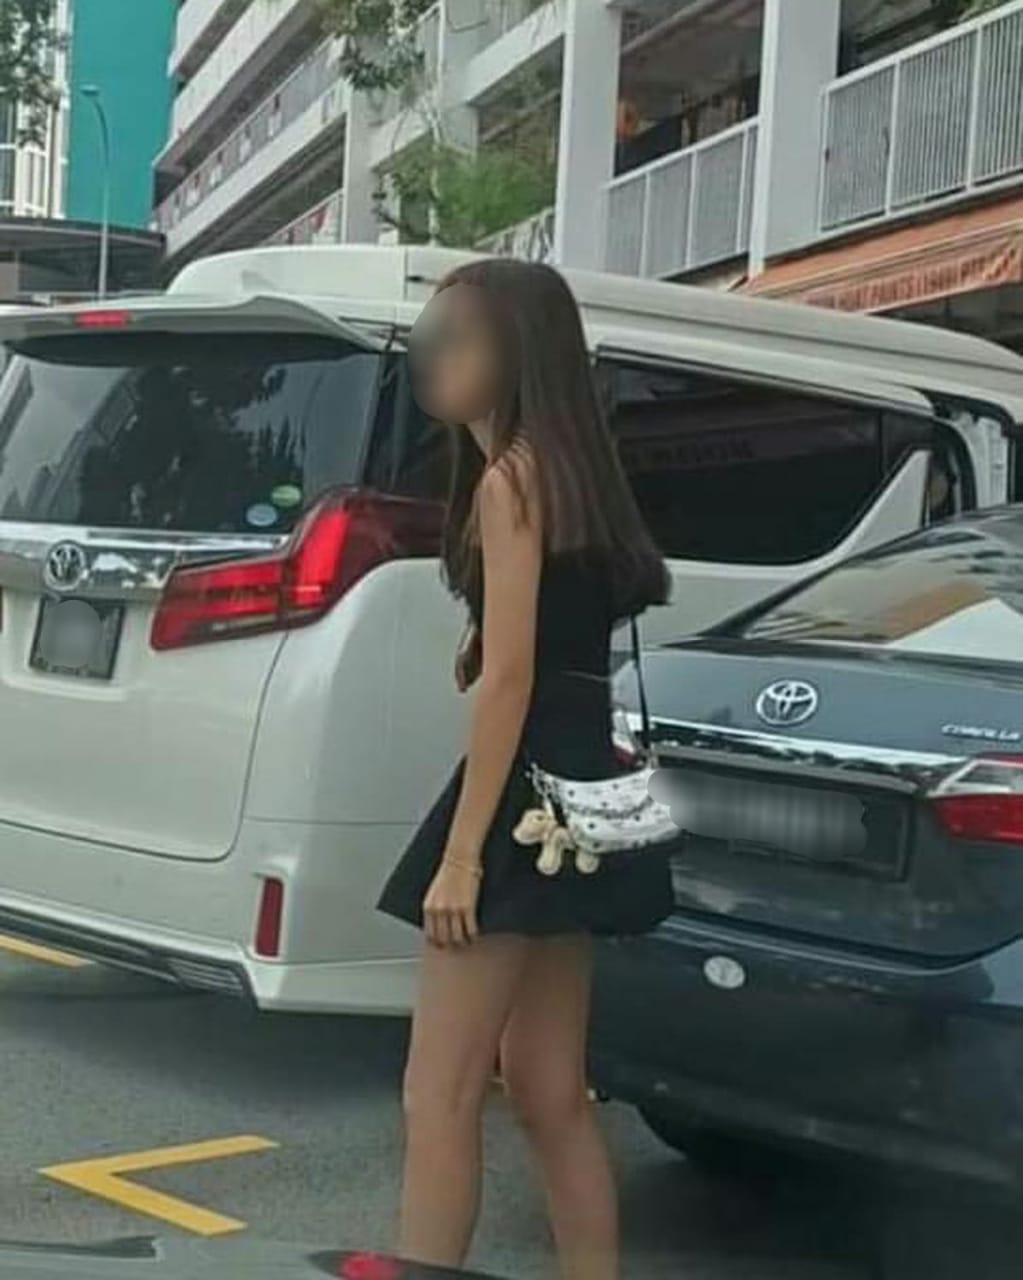 Msian woman waiting for her after she chups the empty parking spot